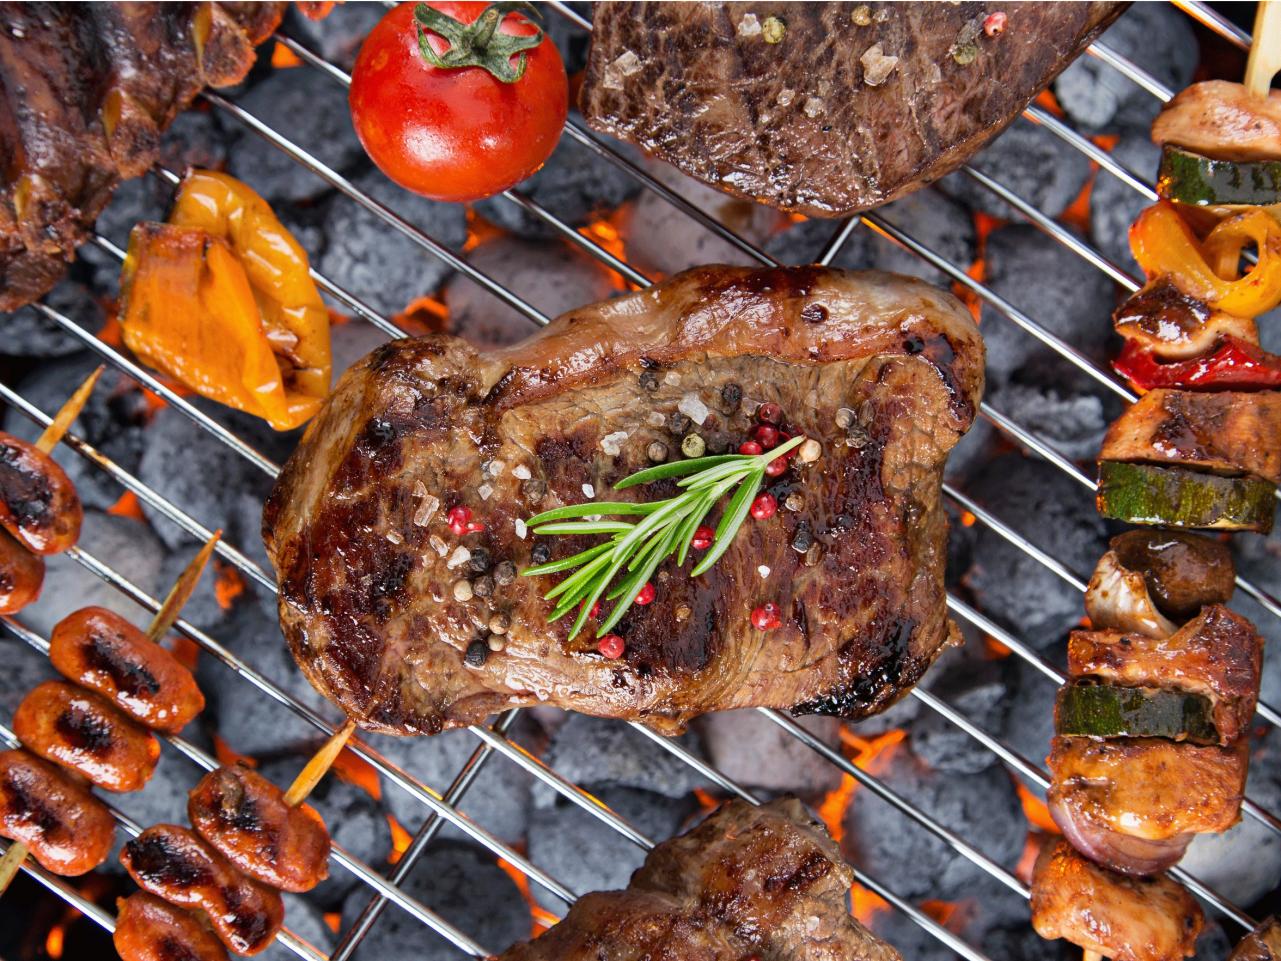 7 Benefits of Grilling That Make Us Love Cooking Outdoors